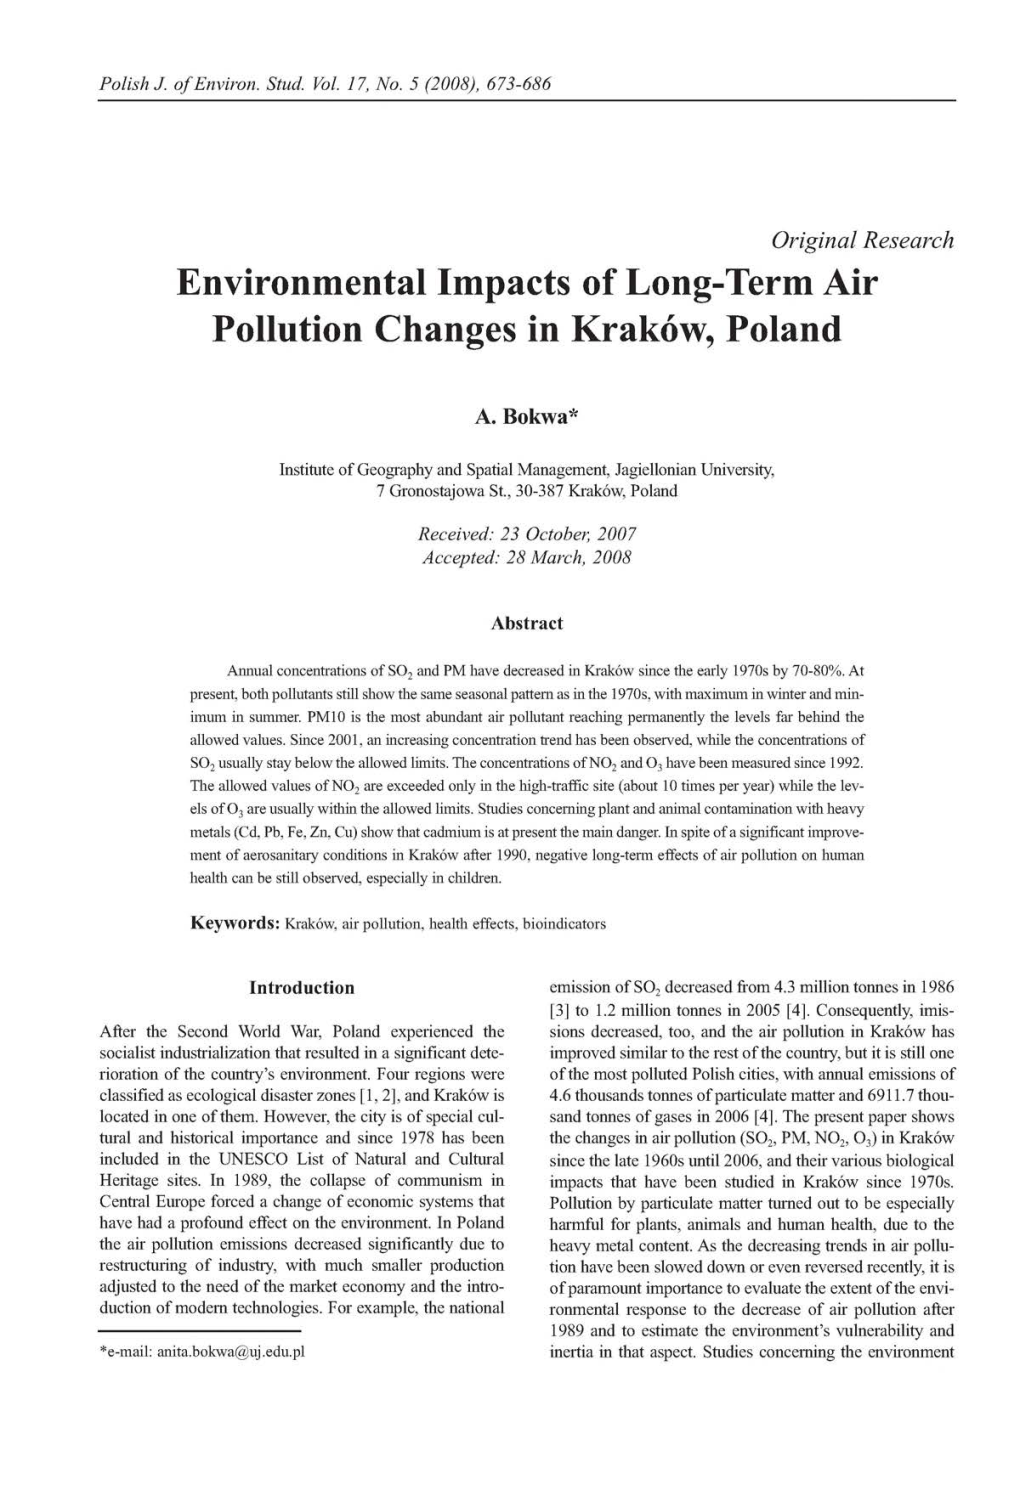 Environmental Impacts of Long-Term Air Pollution Changes in Kraków, Poland